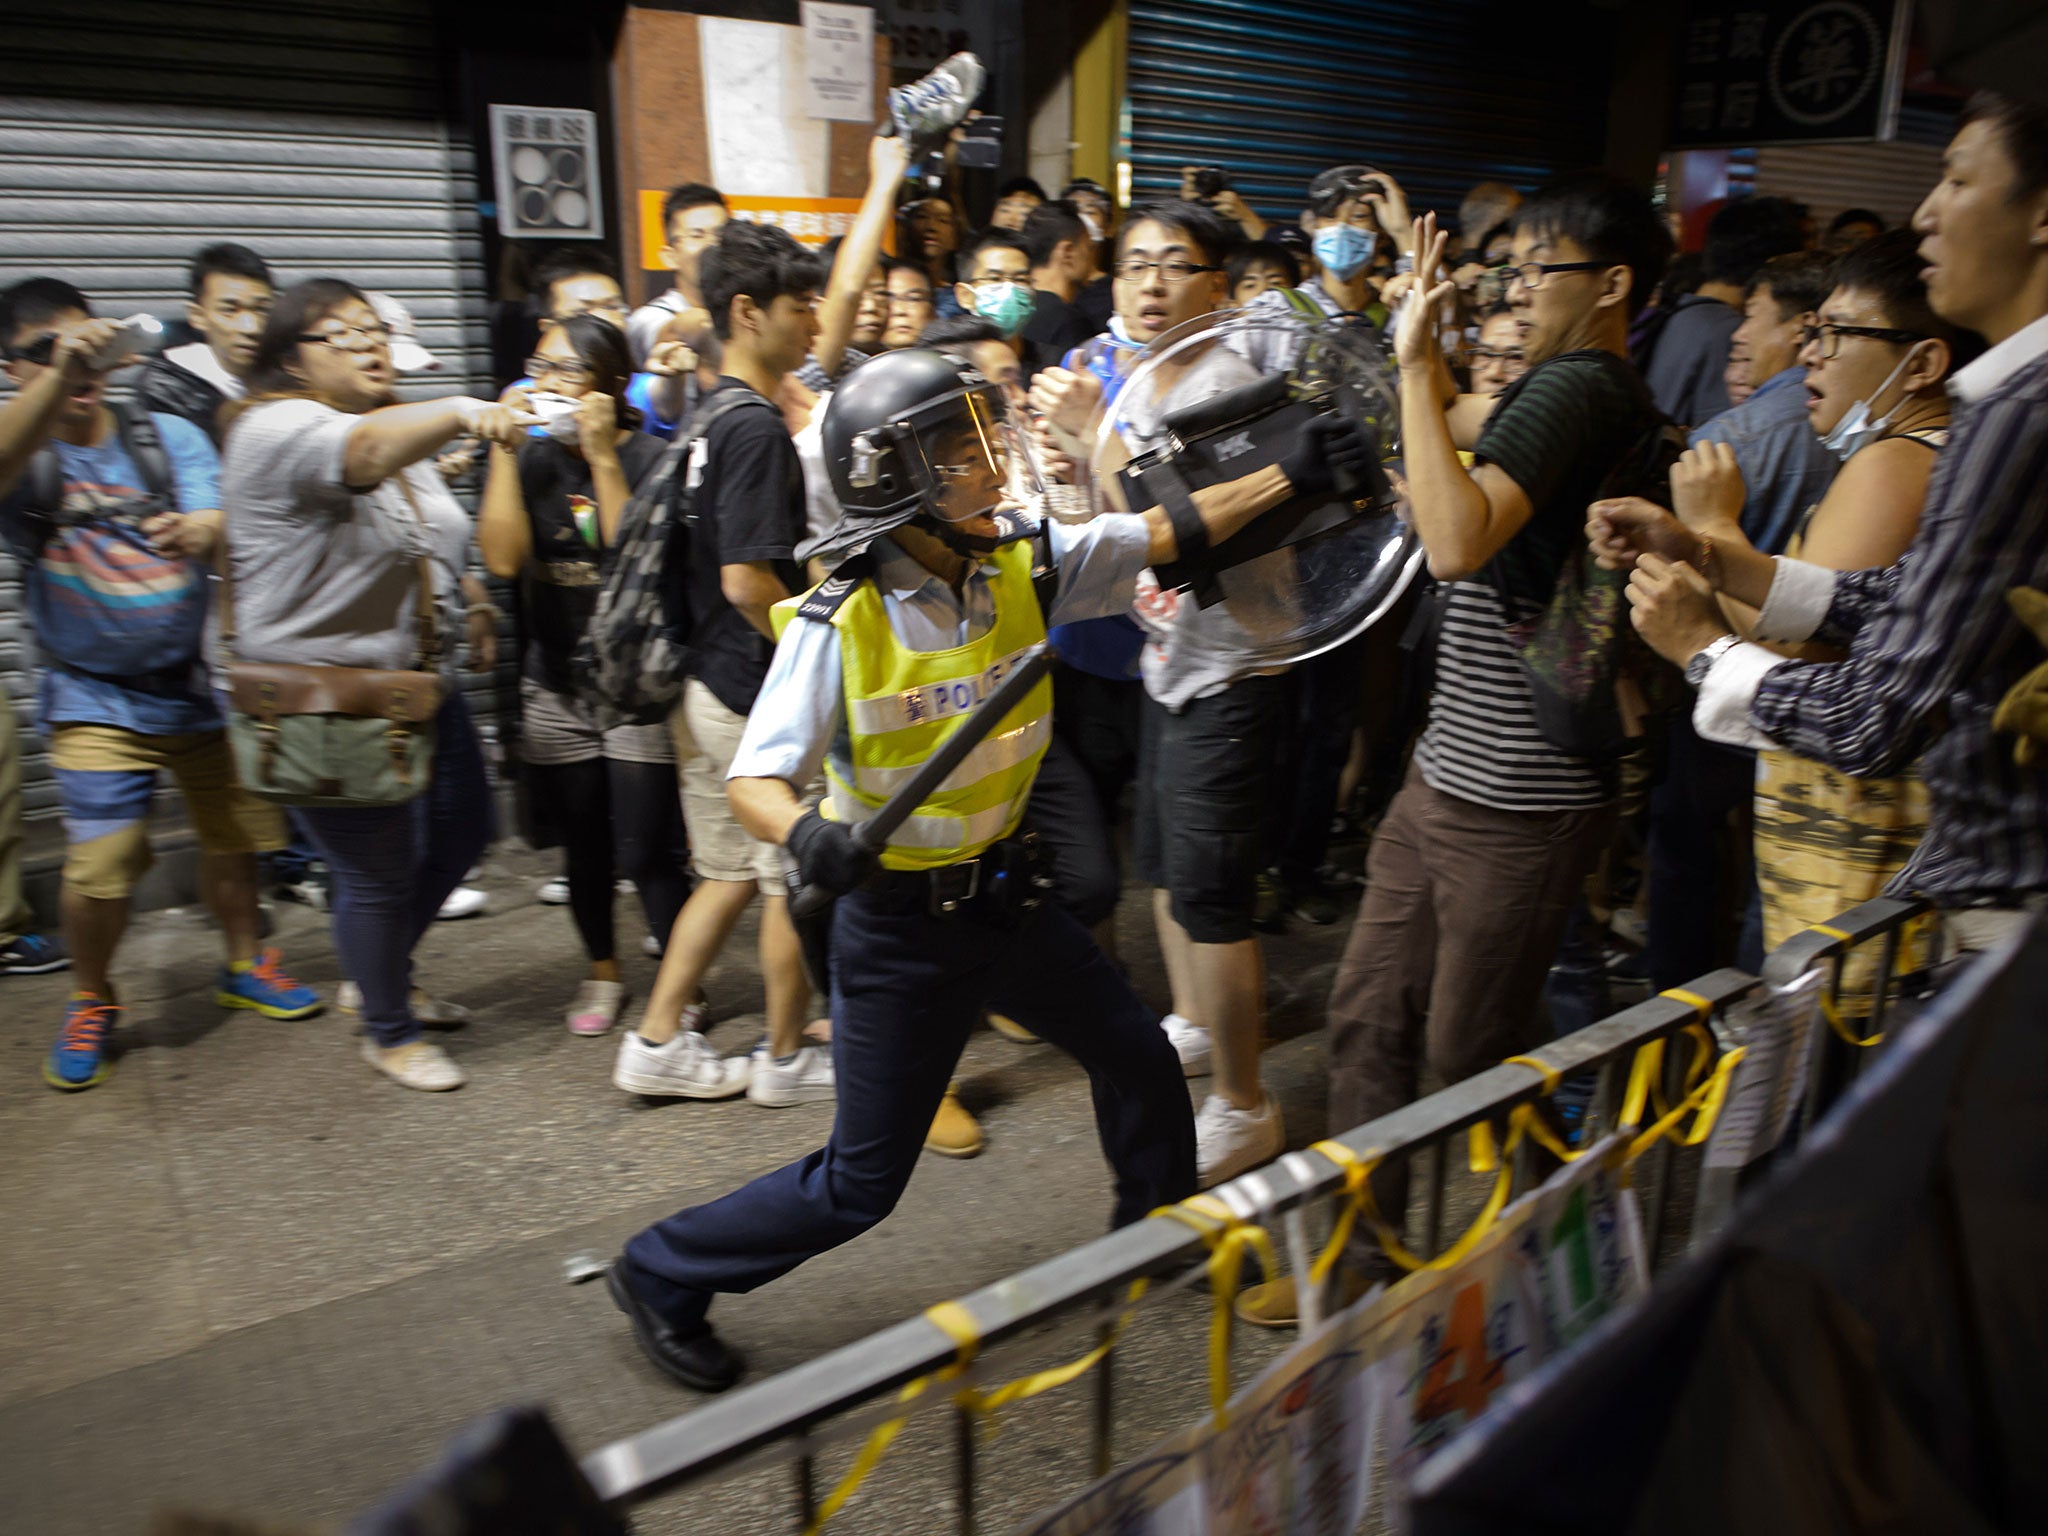 A policeman confronts protesters in the Mong Kok shopping district of Hong Kong